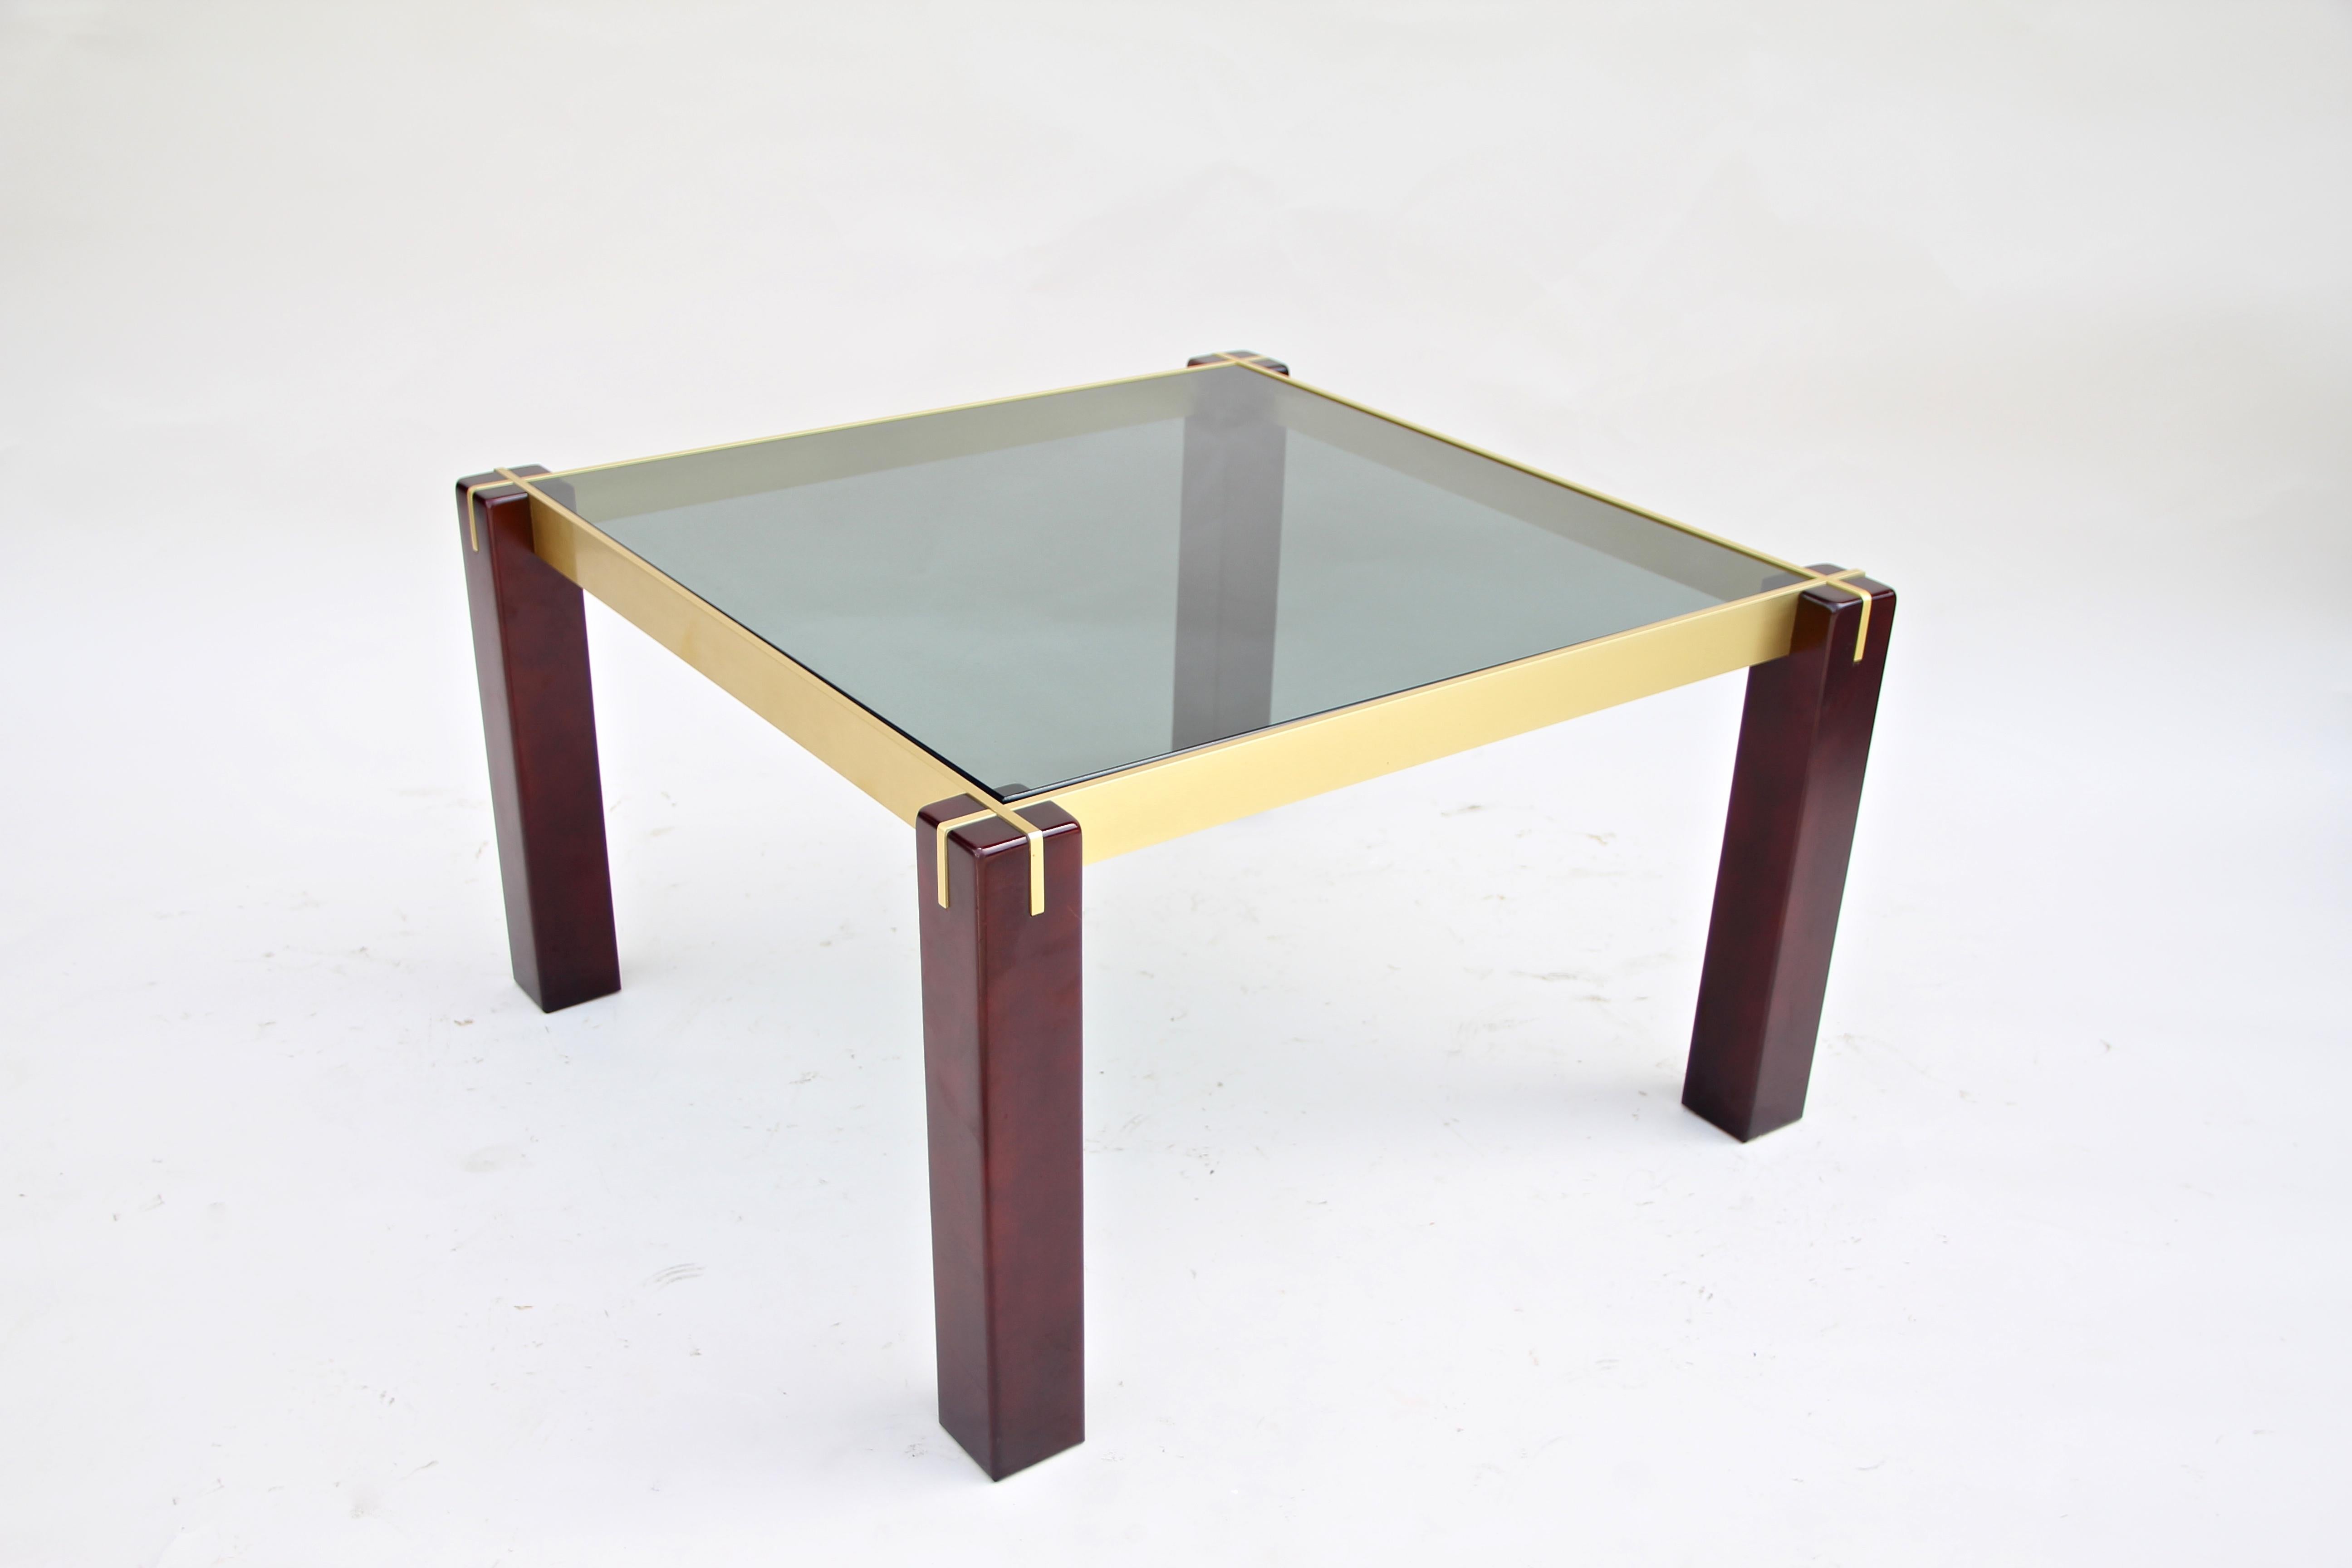 Beech Midcentury Side Table with Brass Bars and Smoked Glass, Italy, circa 1960 For Sale